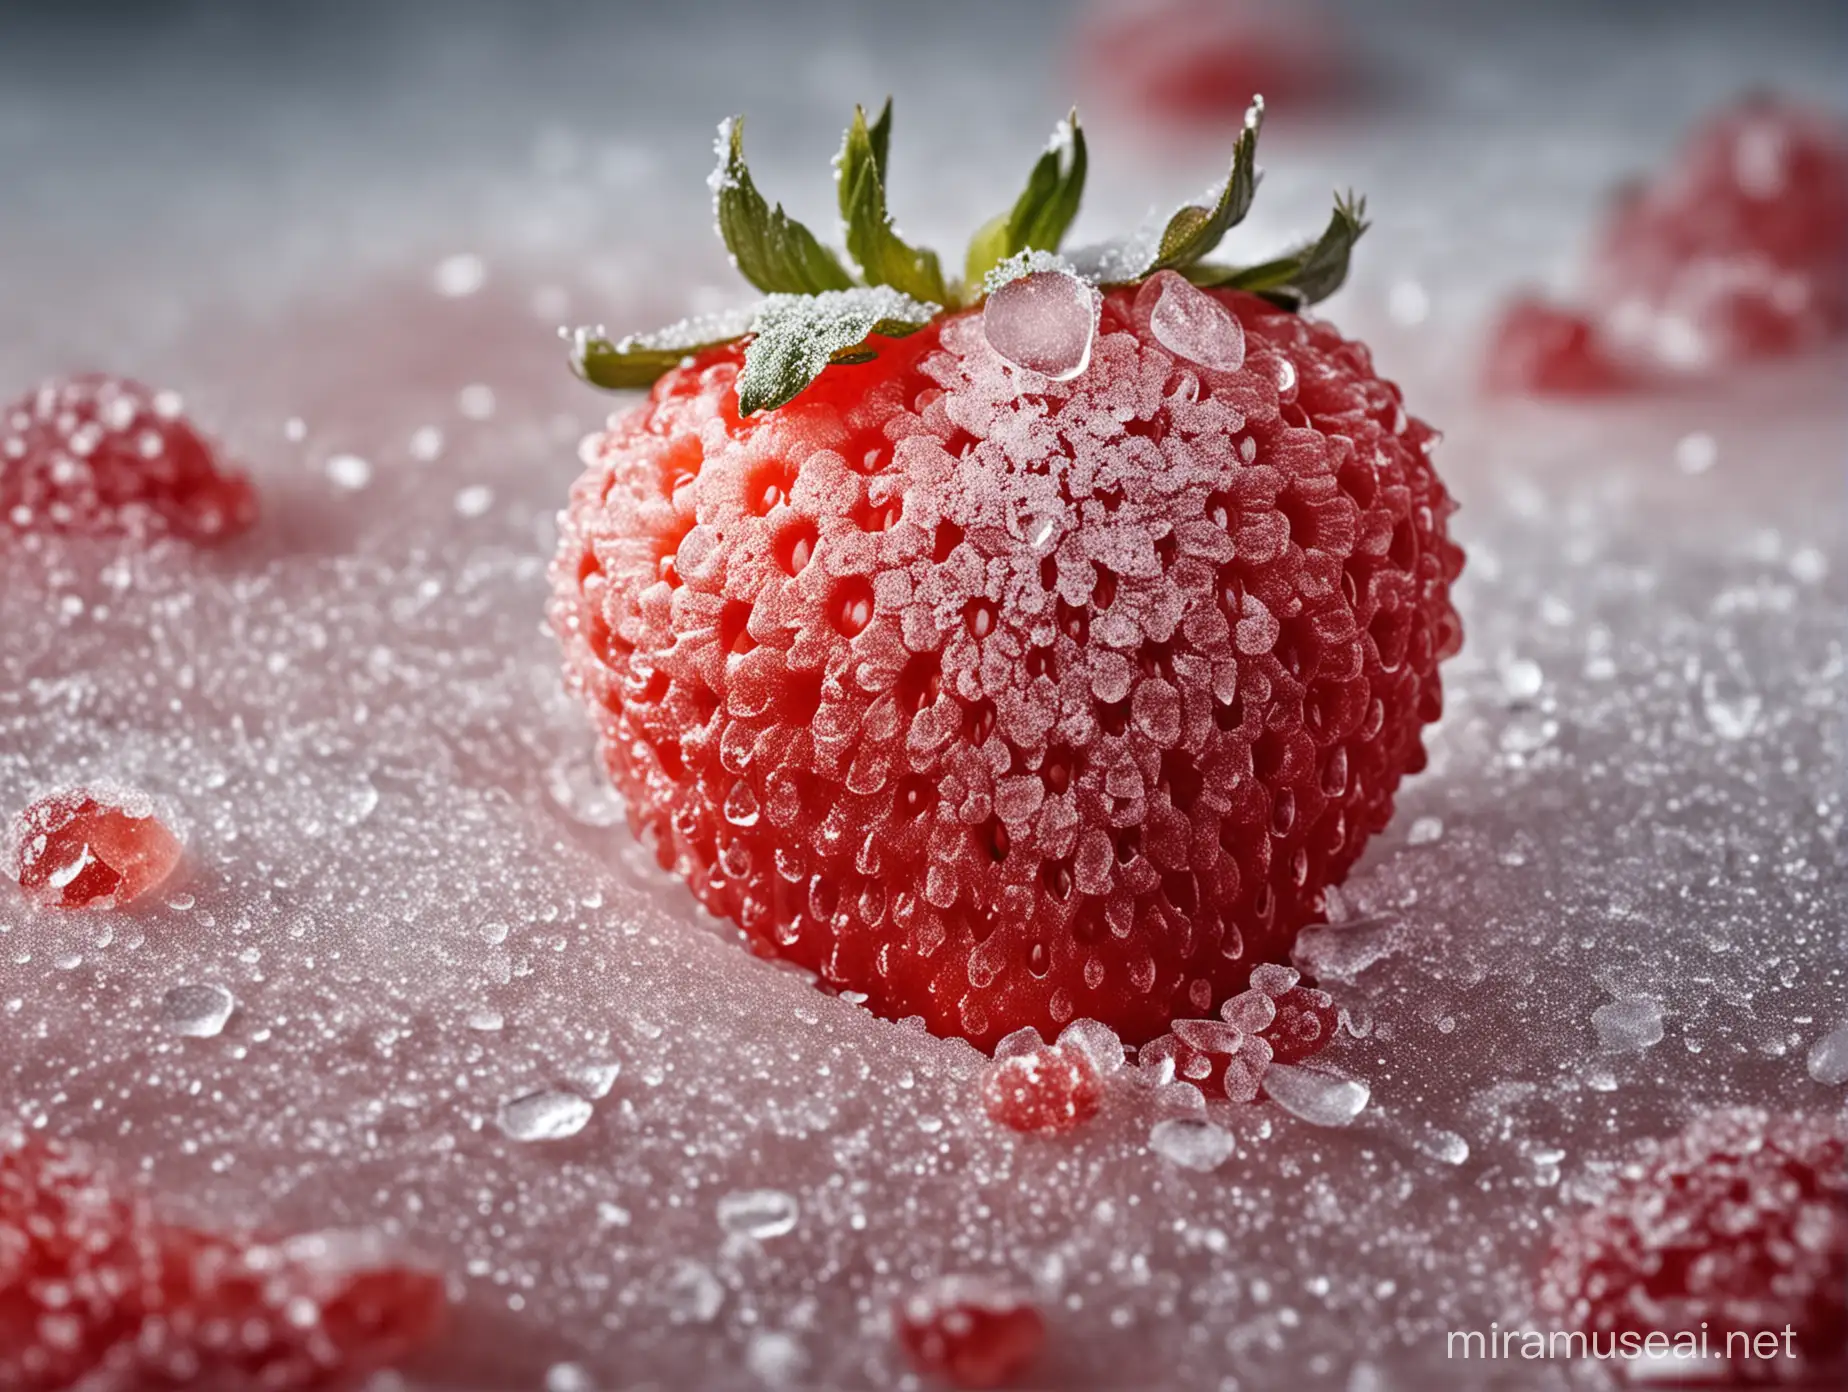 Vibrant Frozen Strawberry Capturing Natures Icy Delight